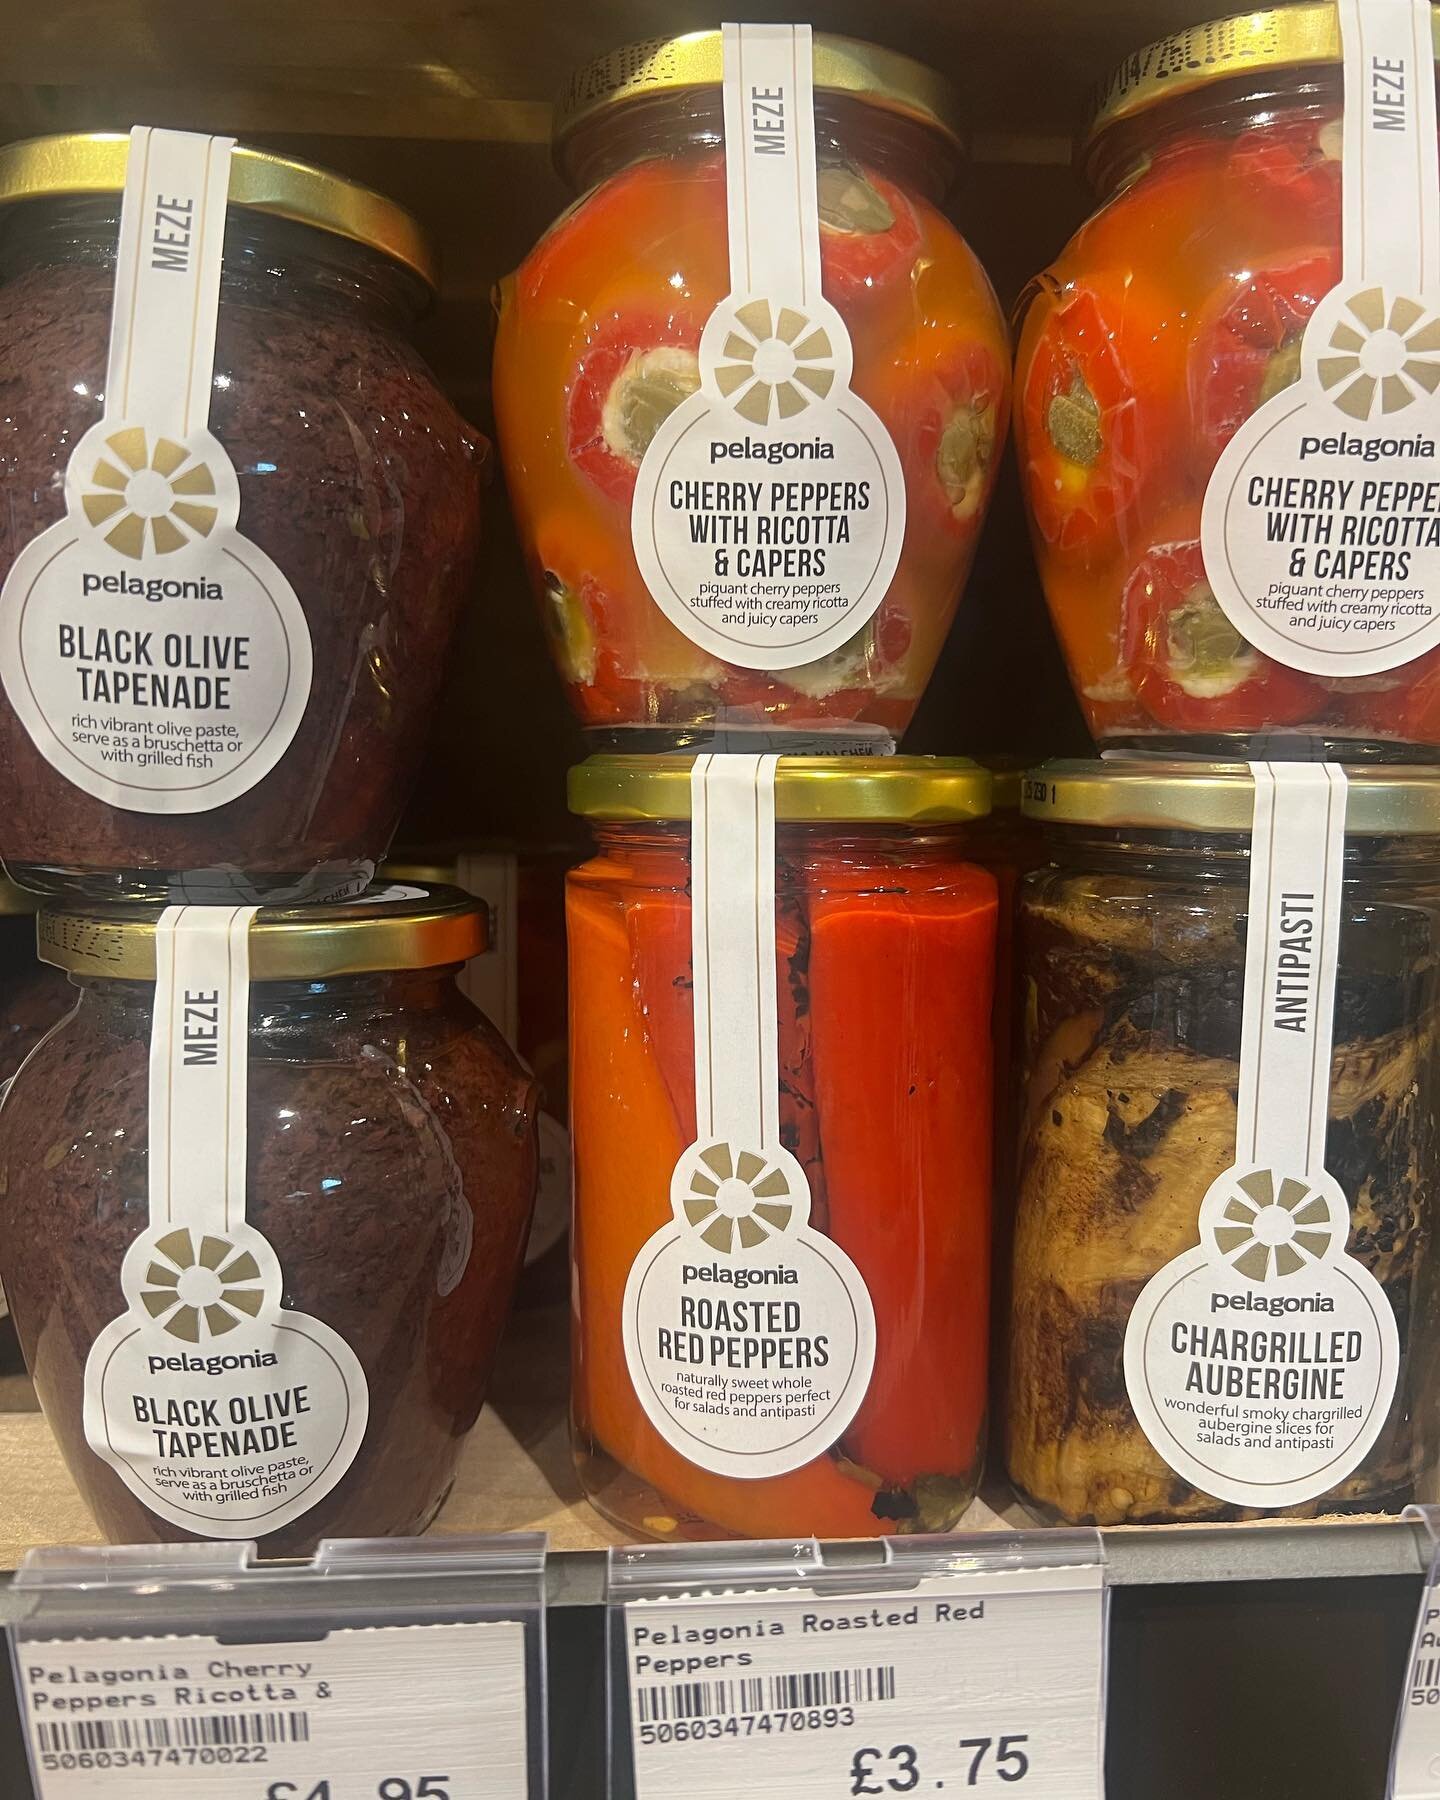 Look what's new this week! 

Some yummy @pelagonia antipasti and meze deli items just in time for your summer salads

whisky and wildflower gin from @cotswoldsdistillery

lavender and lemon organic soap and body wash
And there's more coming soon! #mi